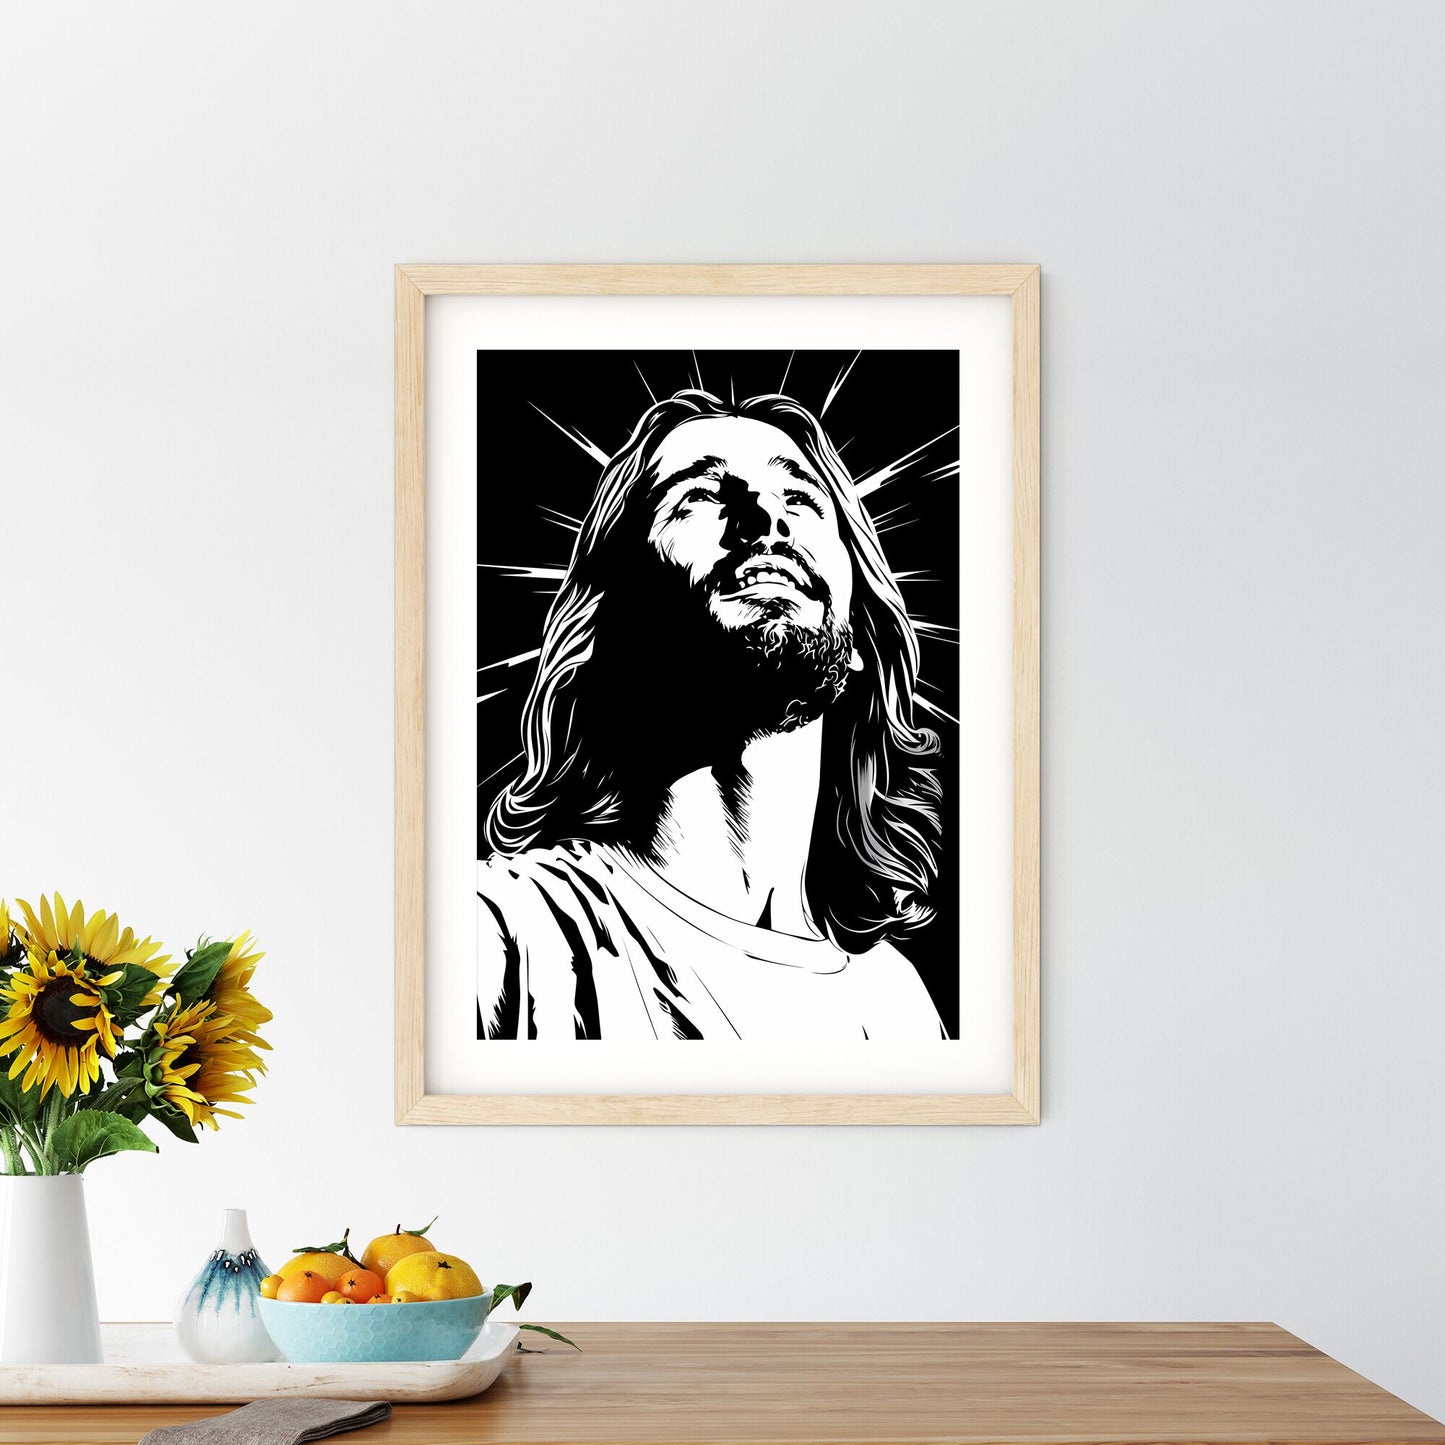 A Man With Long Hair And Beard Looking Up Art Print Default Title